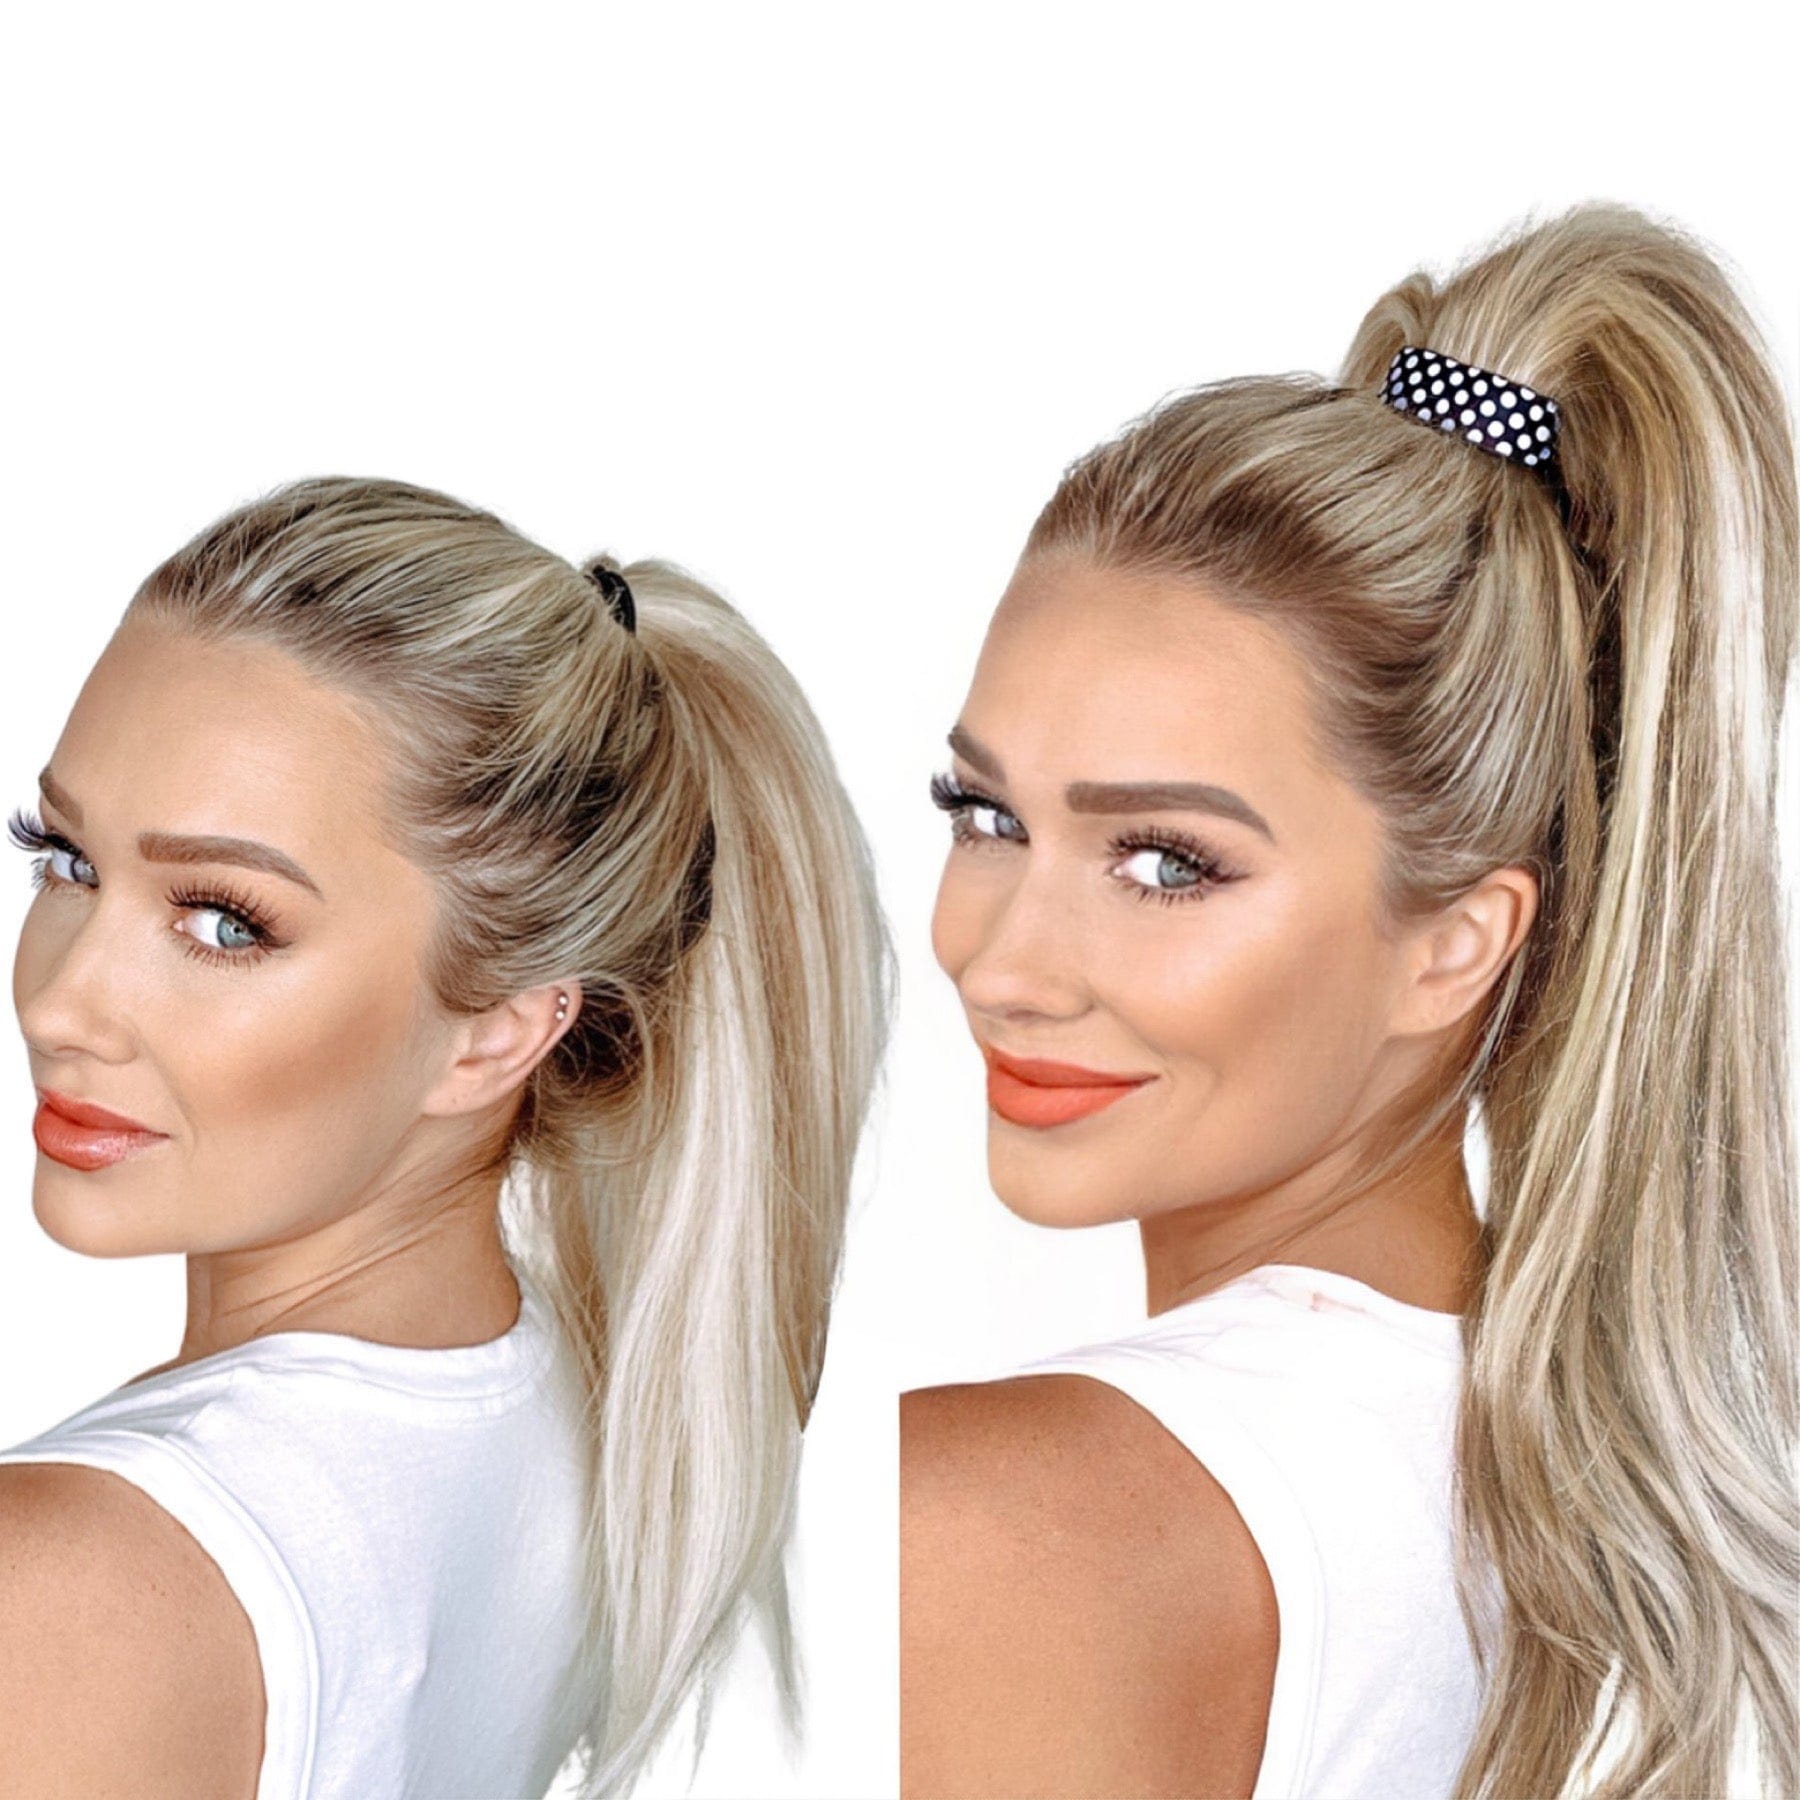 PONY-O Ponytail Holders: 5 Hair Accessories Your PONY-O Will Replace – Pony- O Hair Accessories